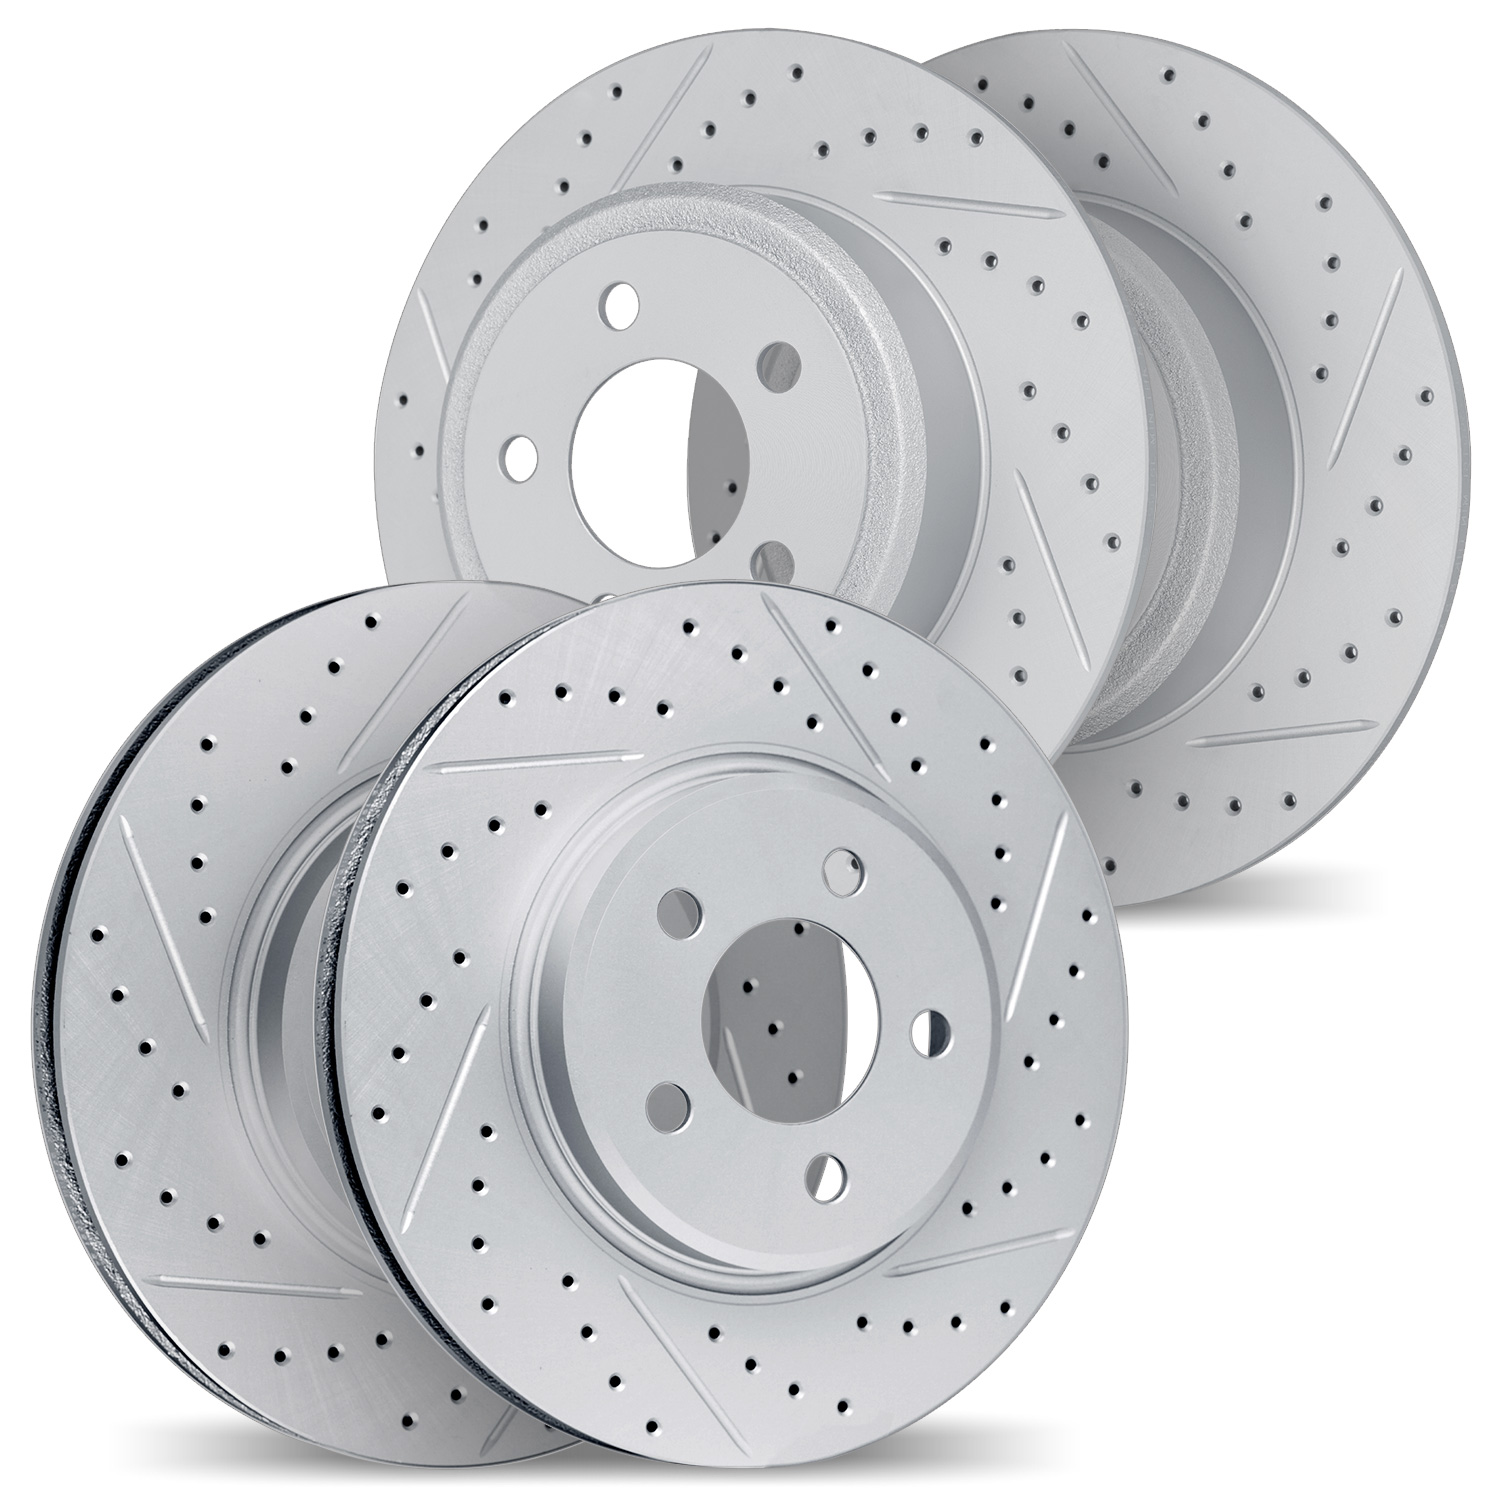 2004-27024 Geoperformance Drilled/Slotted Brake Rotors, 2007-2010 Volvo, Position: Front and Rear